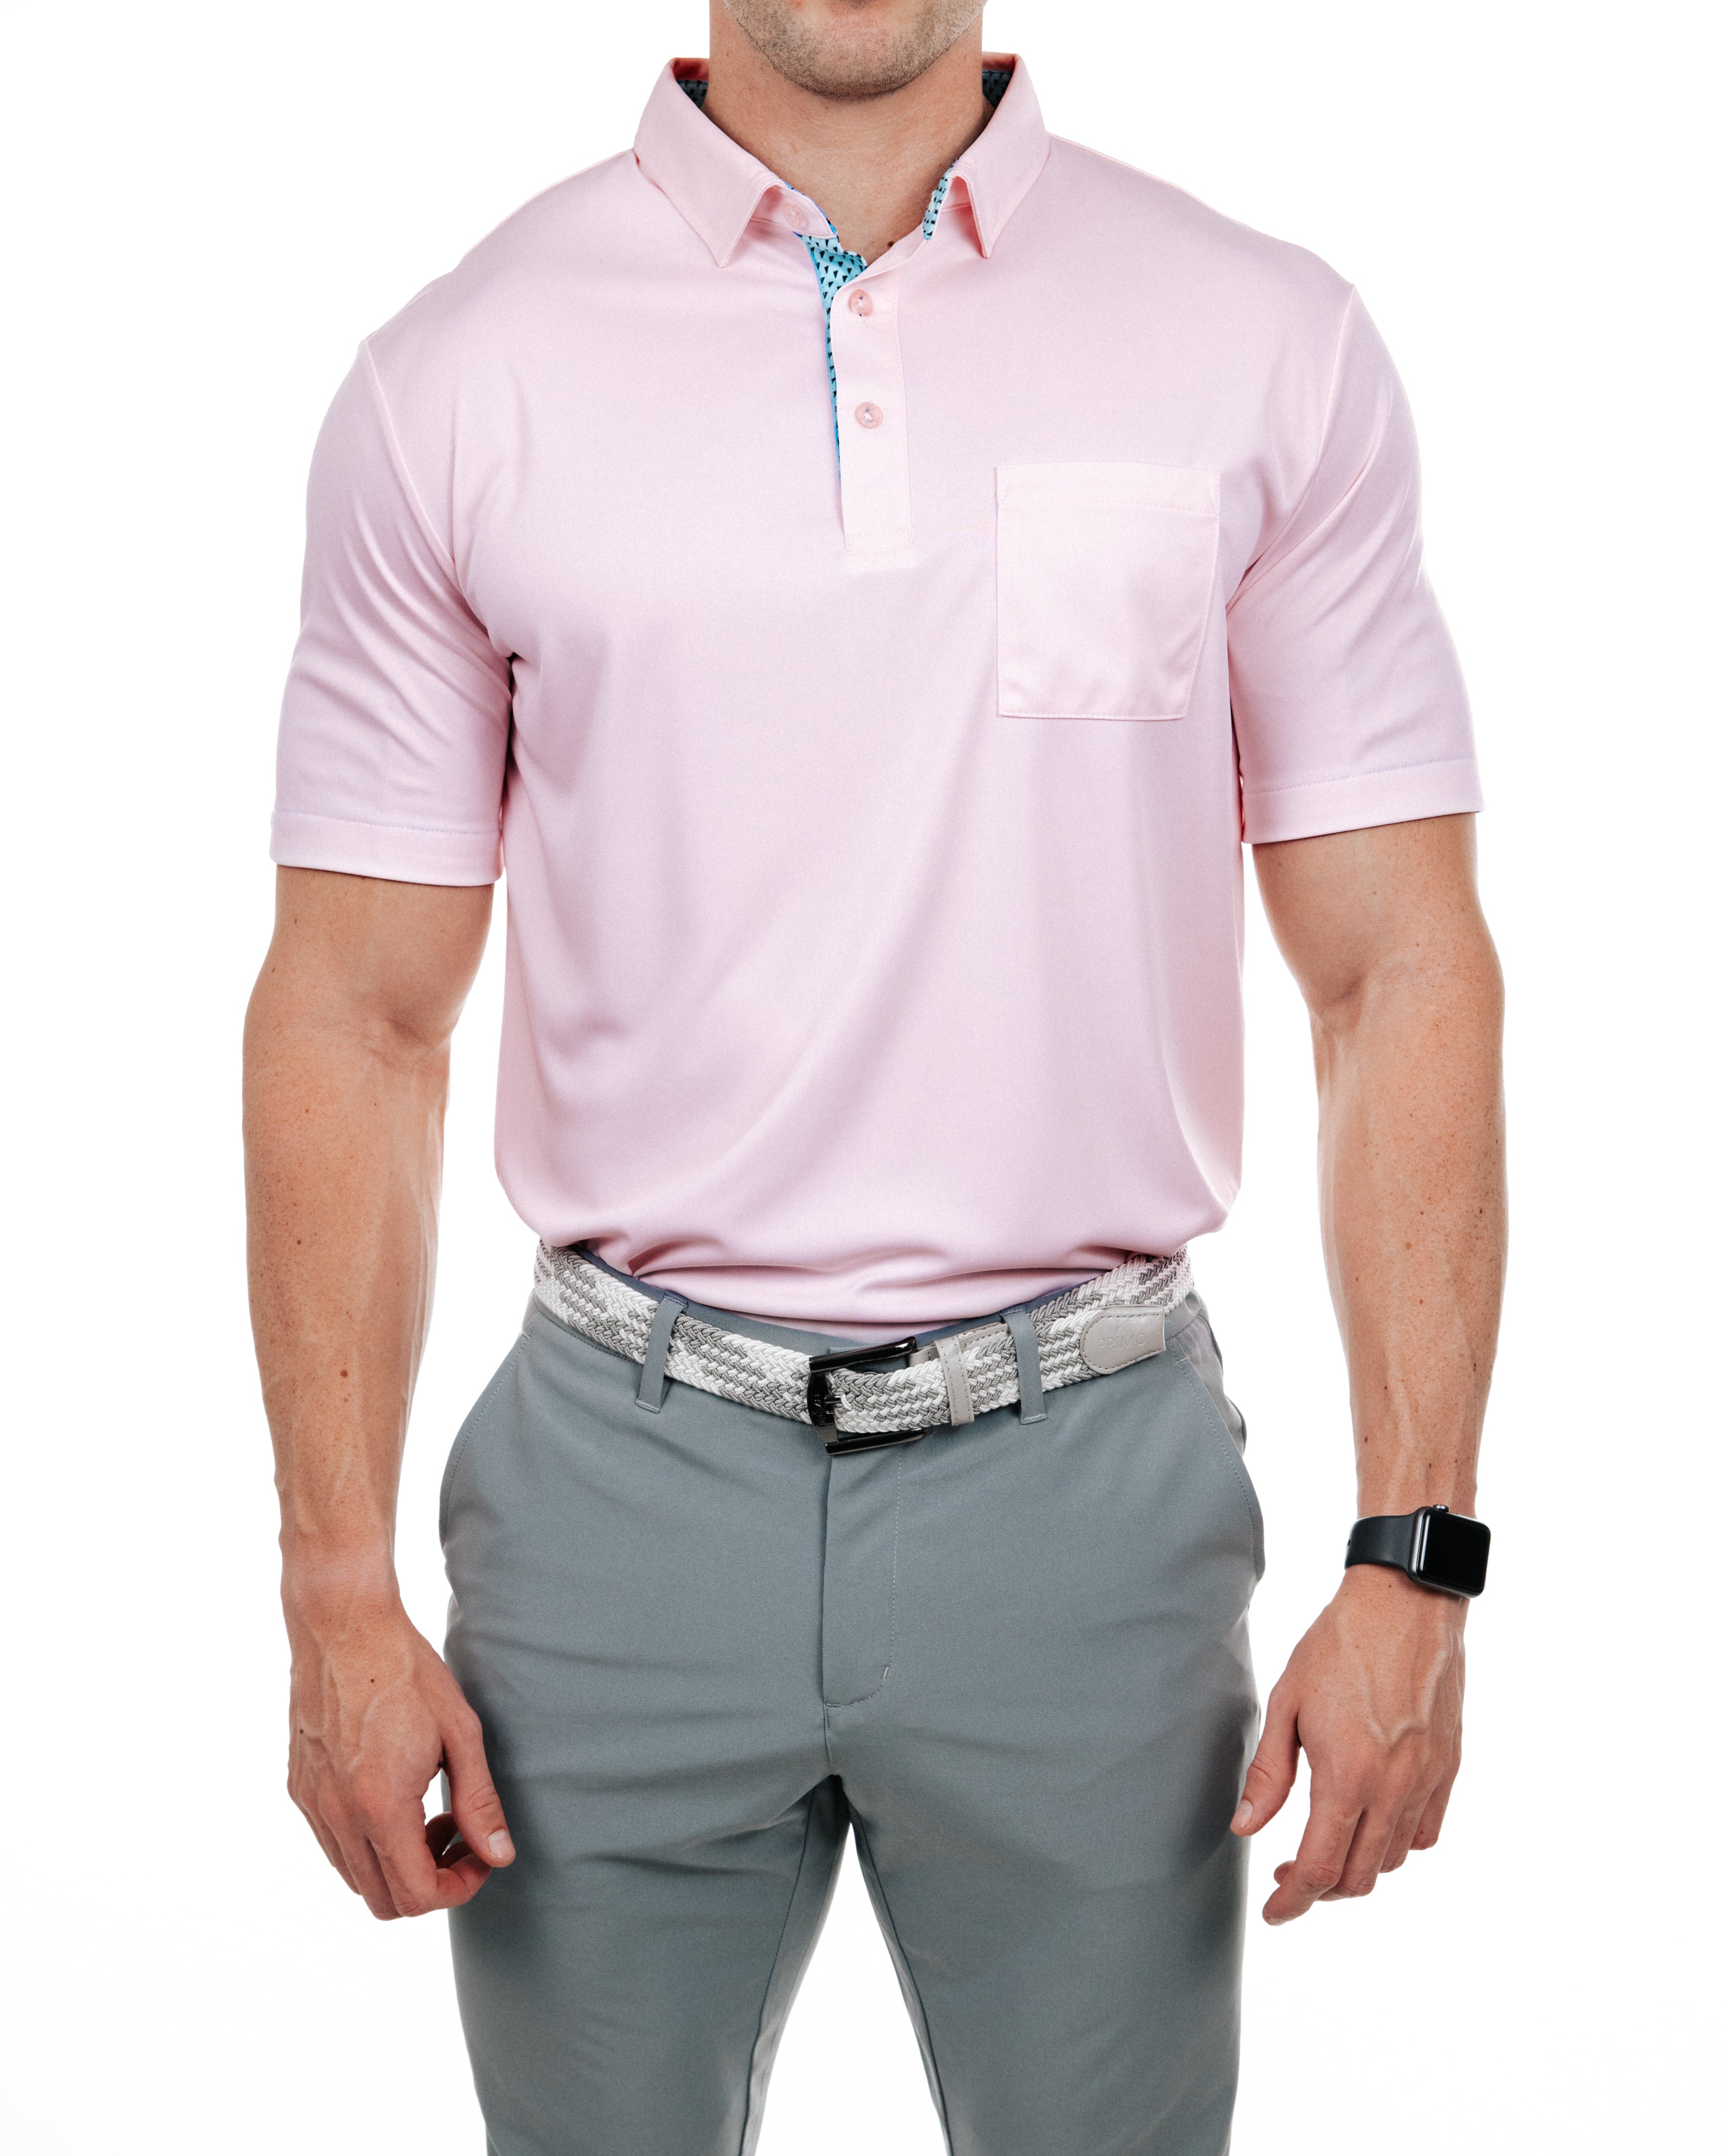 Abaco Classic Polo - Marine Blue – Knot Responsible